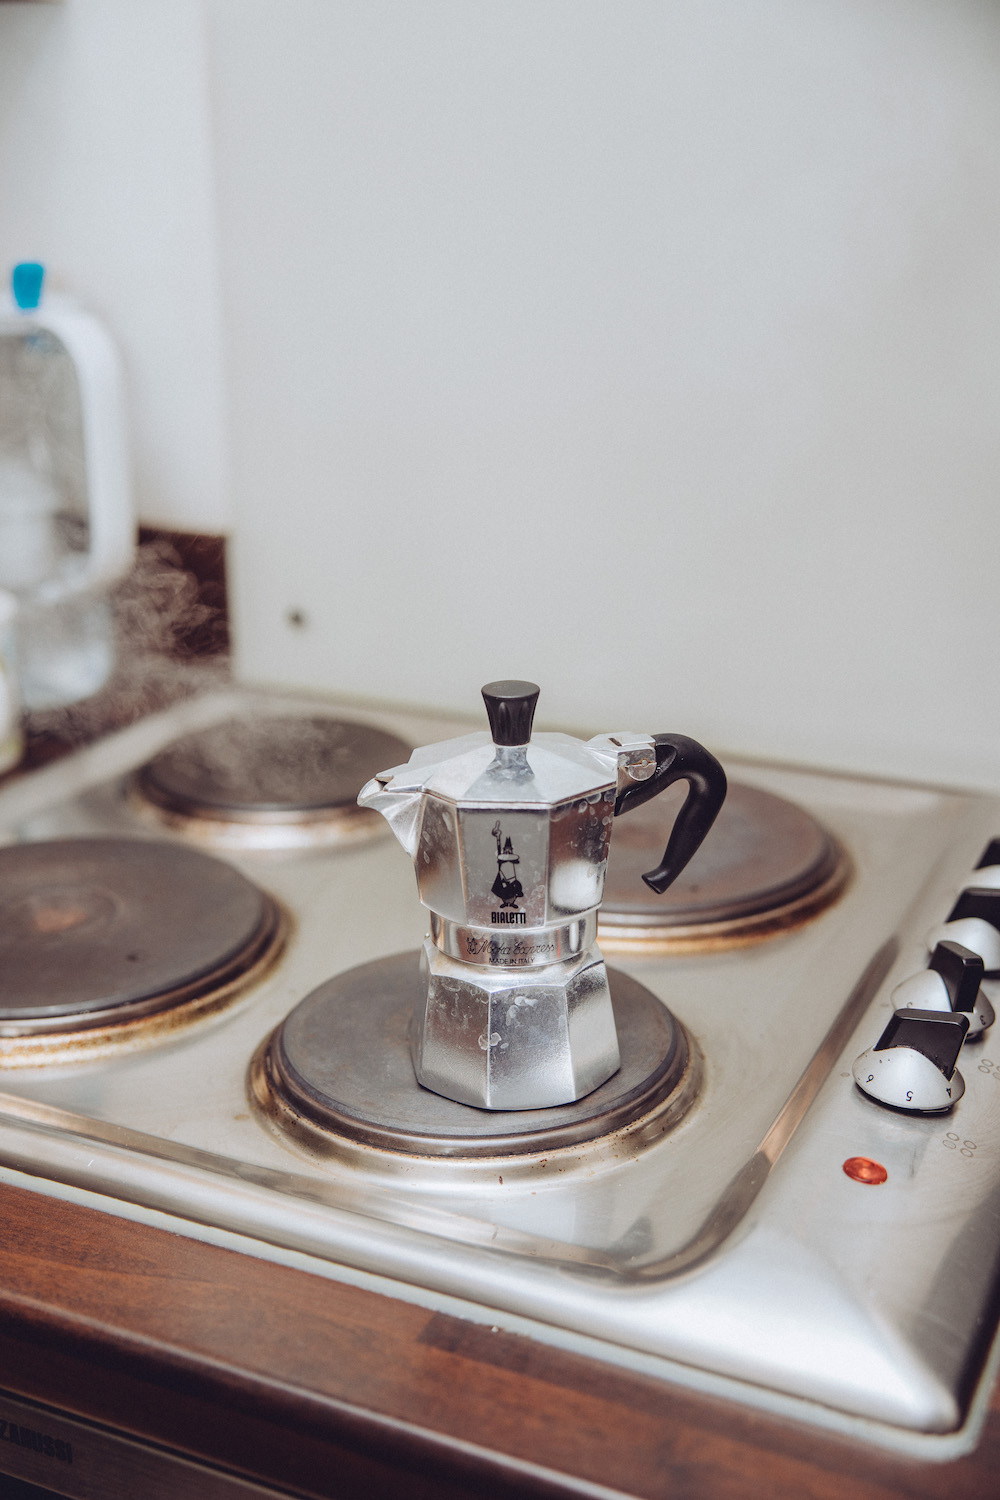 How-To: Make Lattes at Home With a Moka Pot